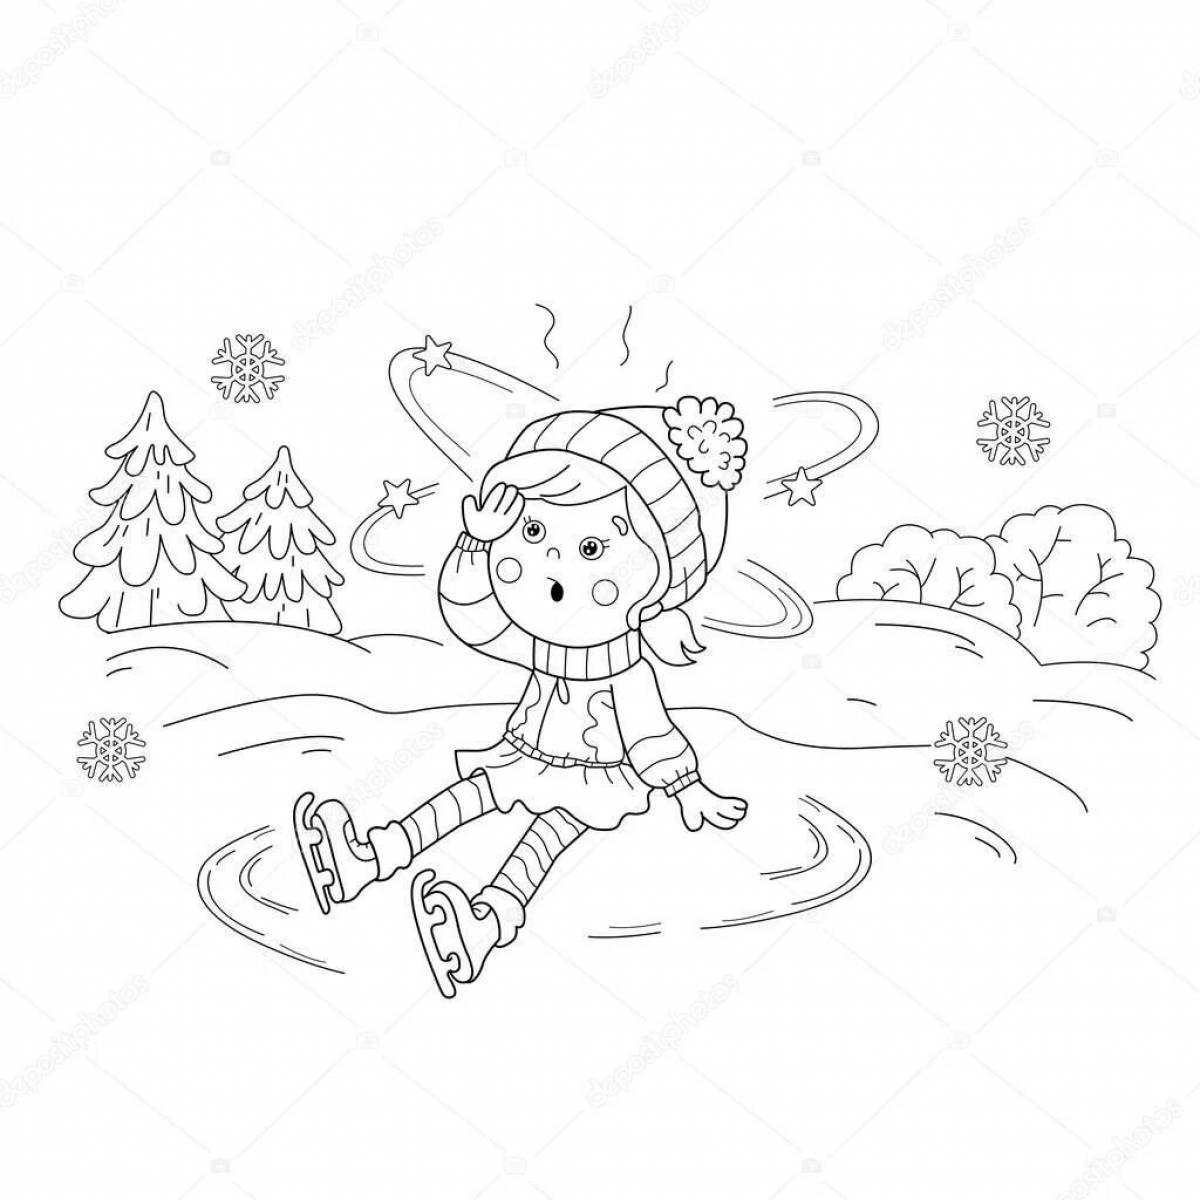 Funny ice beware coloring page